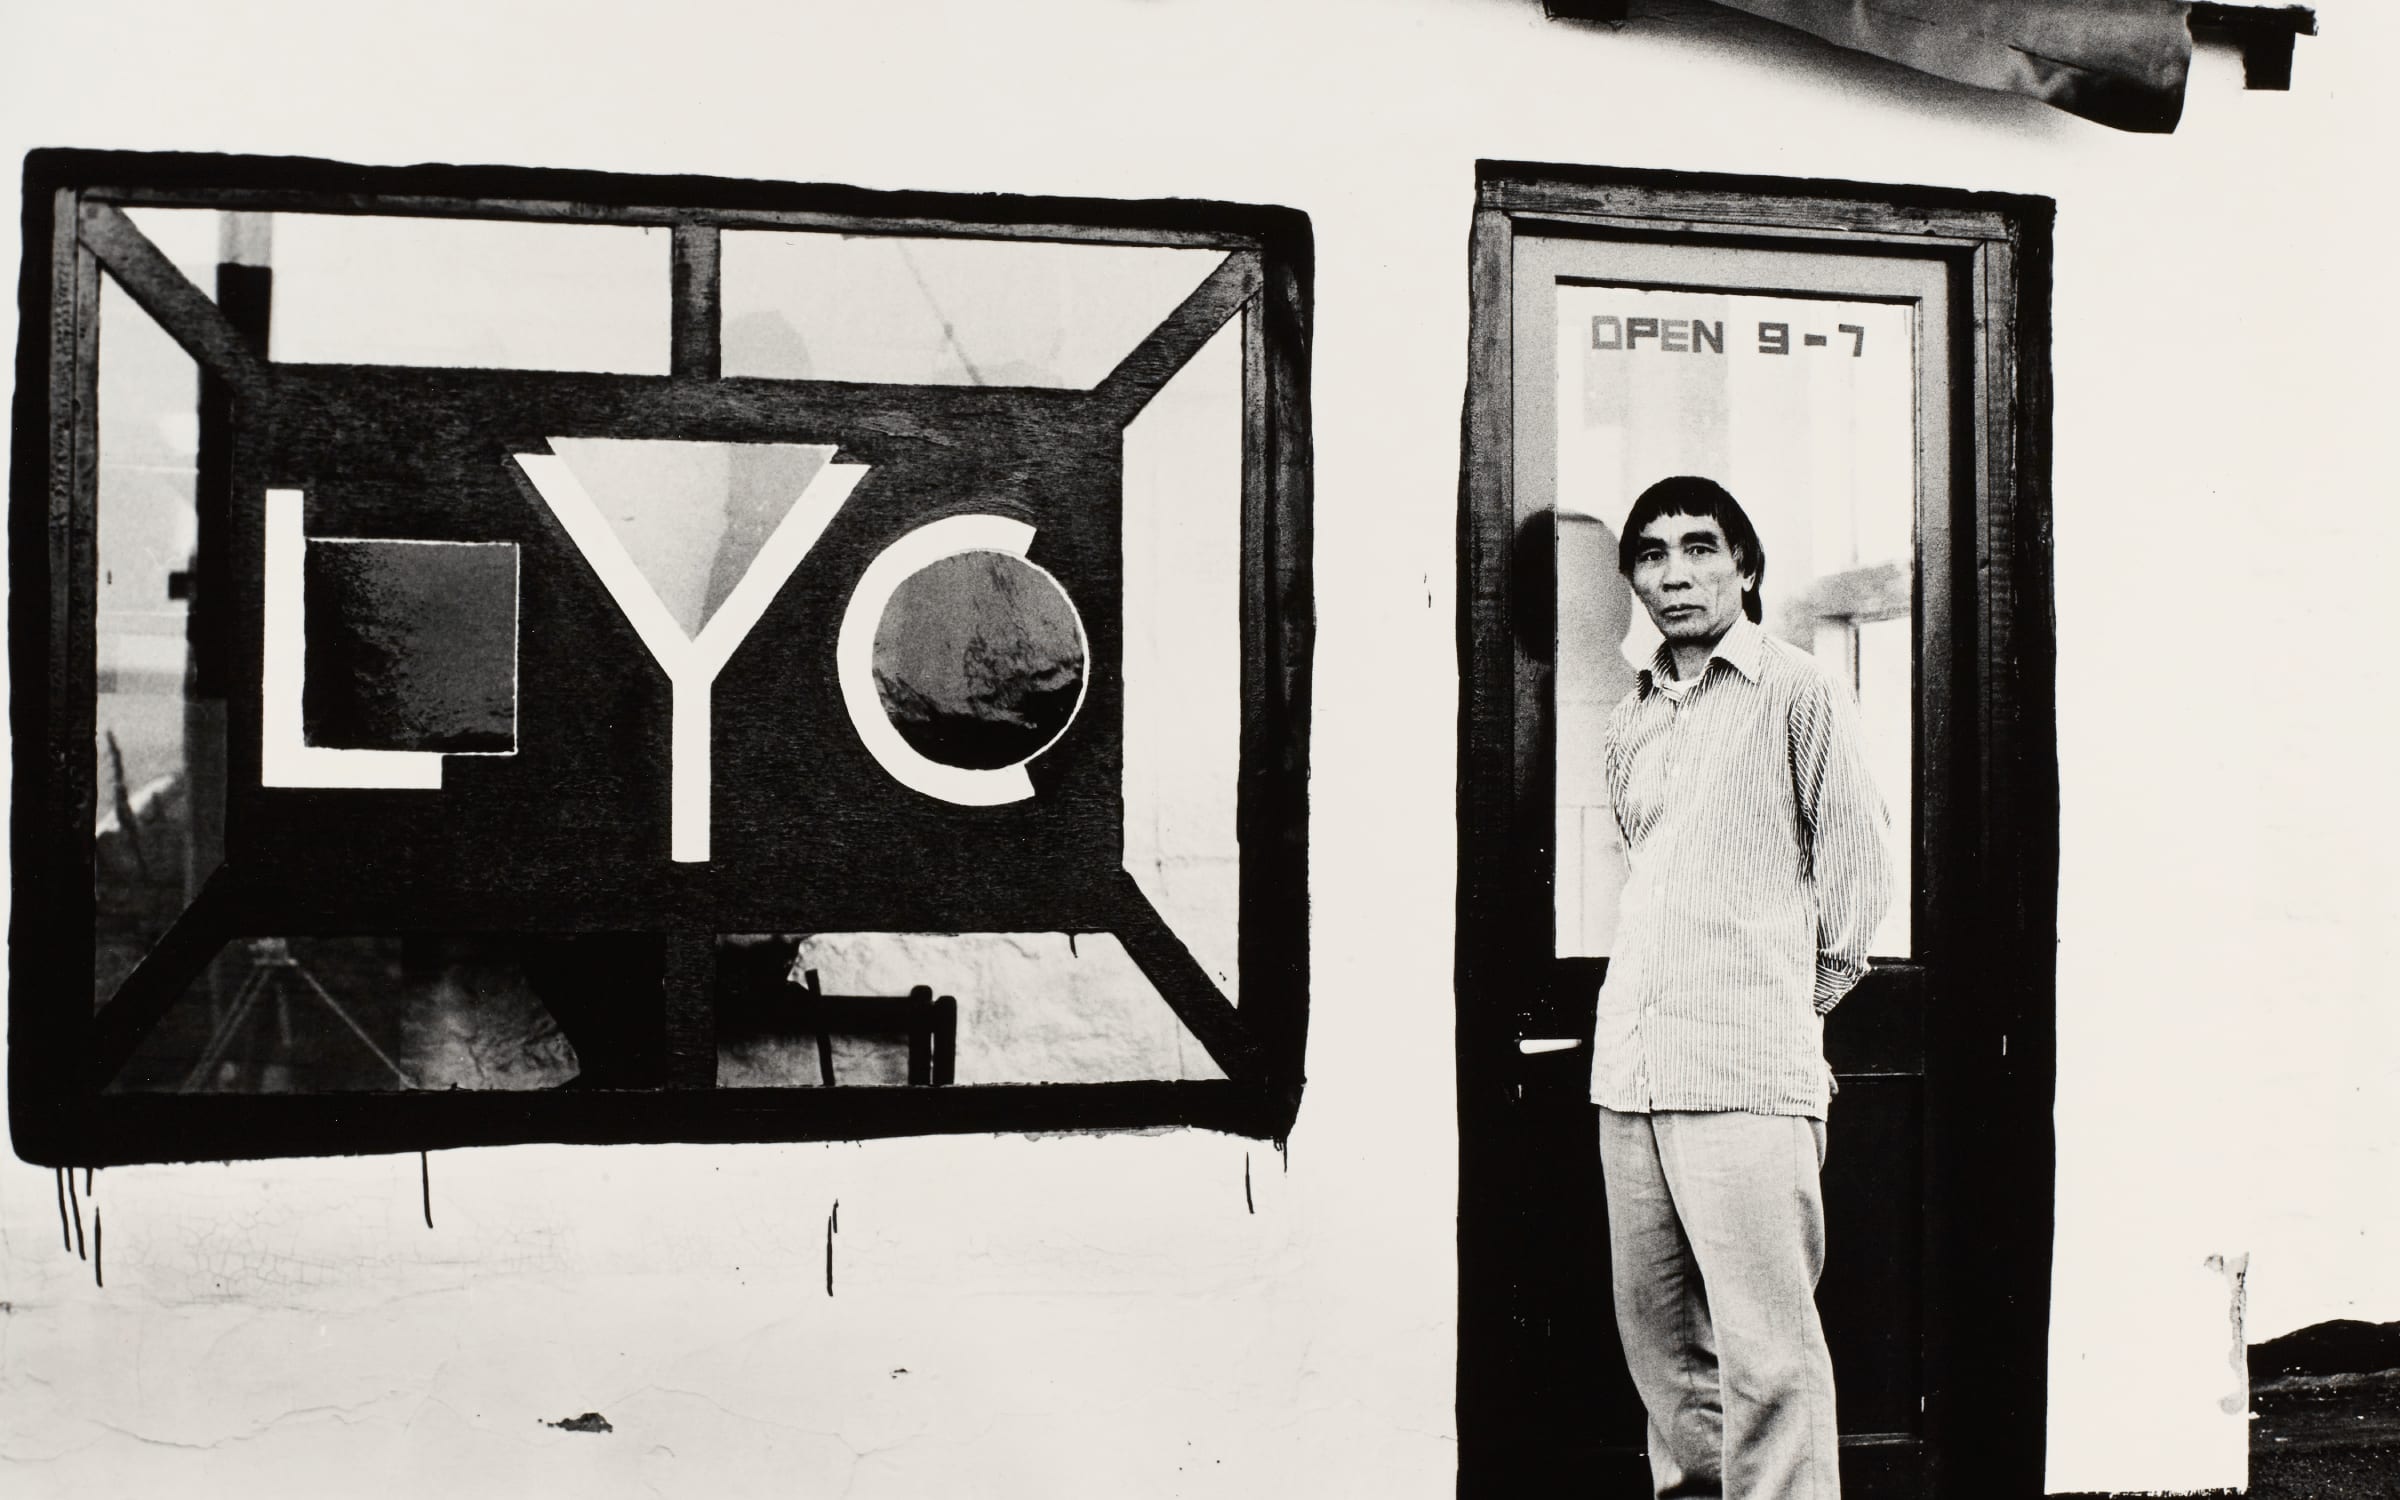 Li Yuan-chia standing at the porch of the LYC Museum & Art Gallery, featuring window designed by David Nash. Courtesy of Li Yuan-chia Archive, The University of Manchester Library.